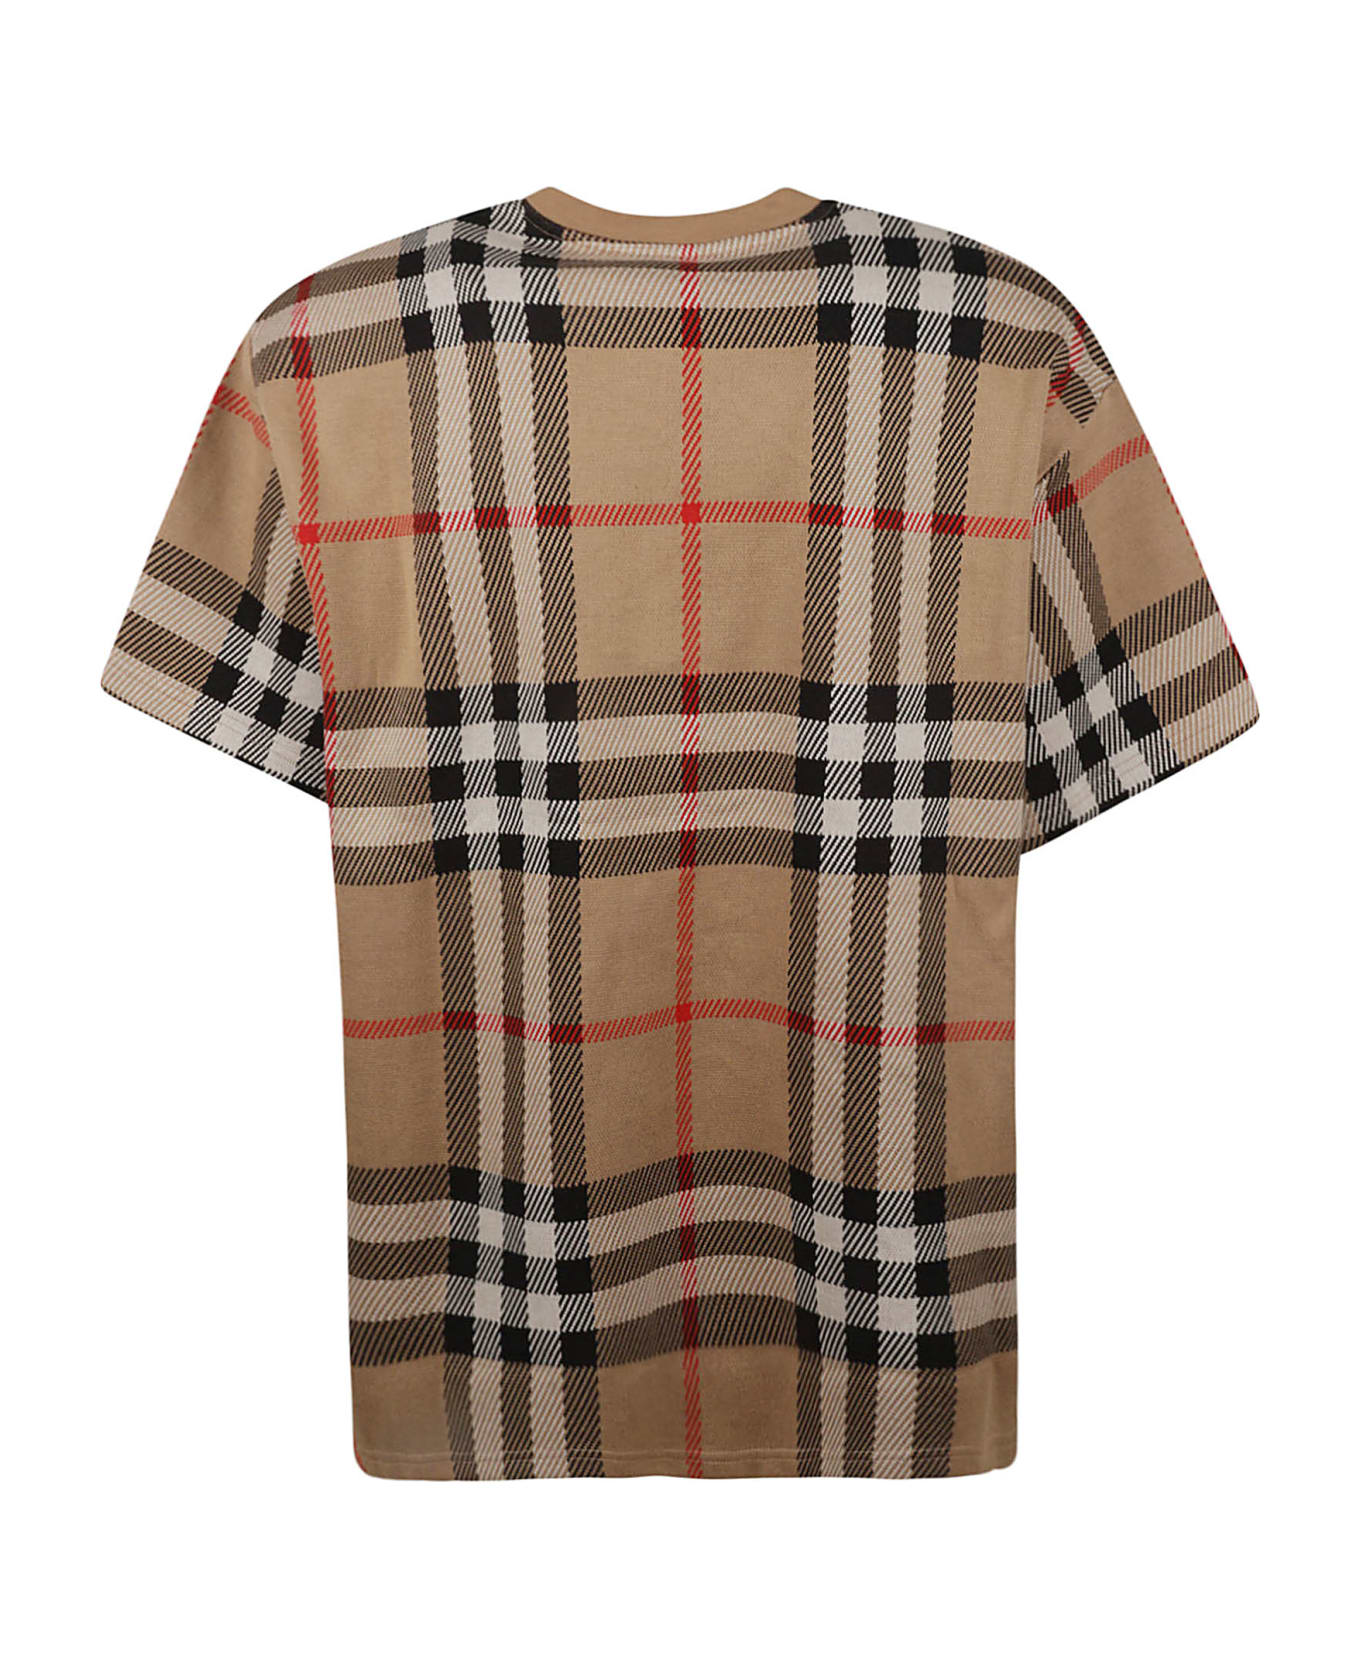 Burberry Ferry T-shirt - Archive Beige Ip Chk